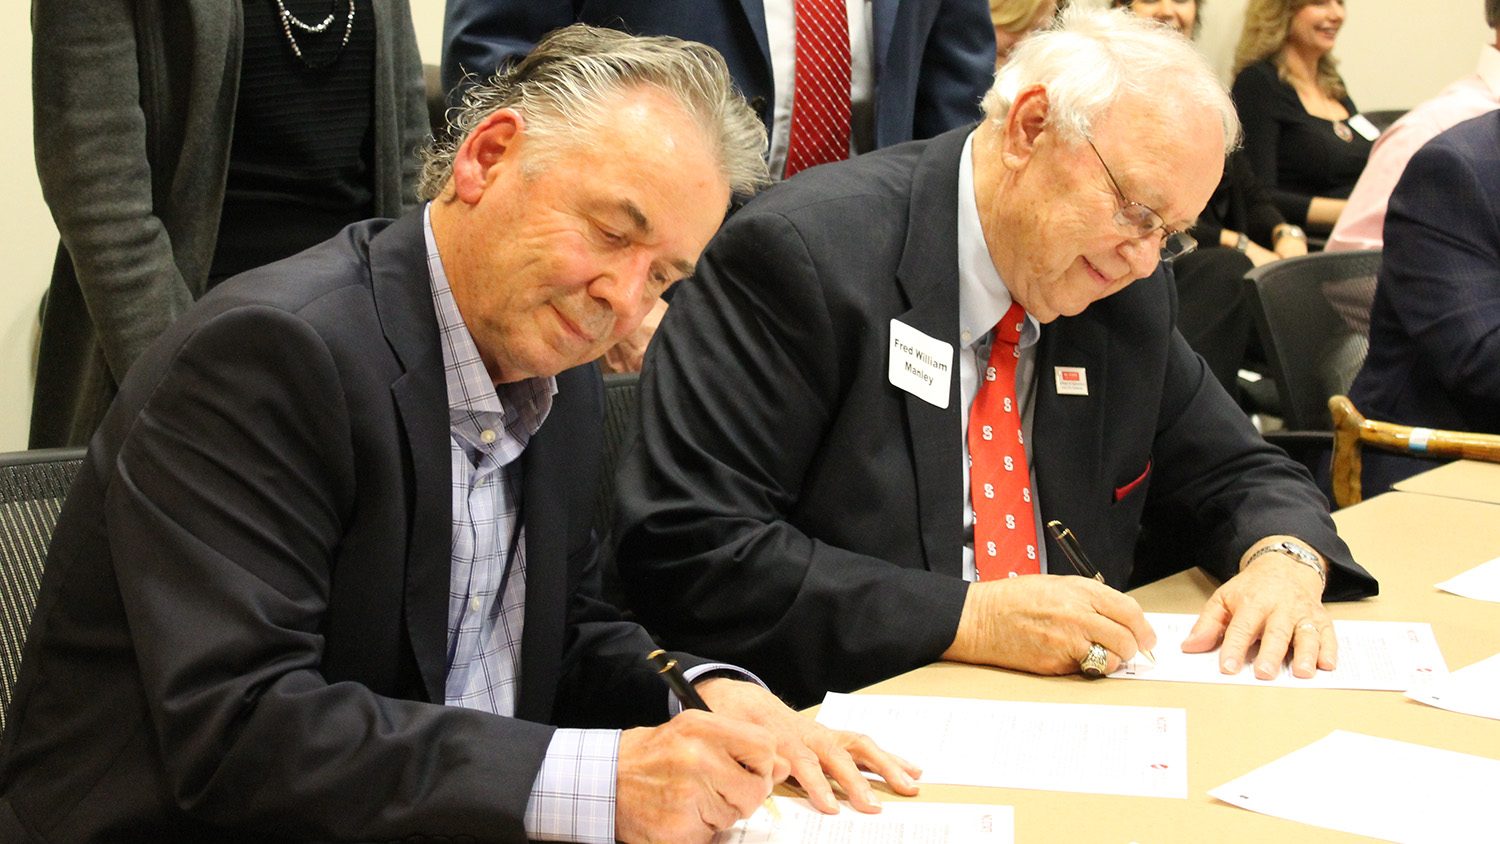 Two men seated at a table, signing papers.